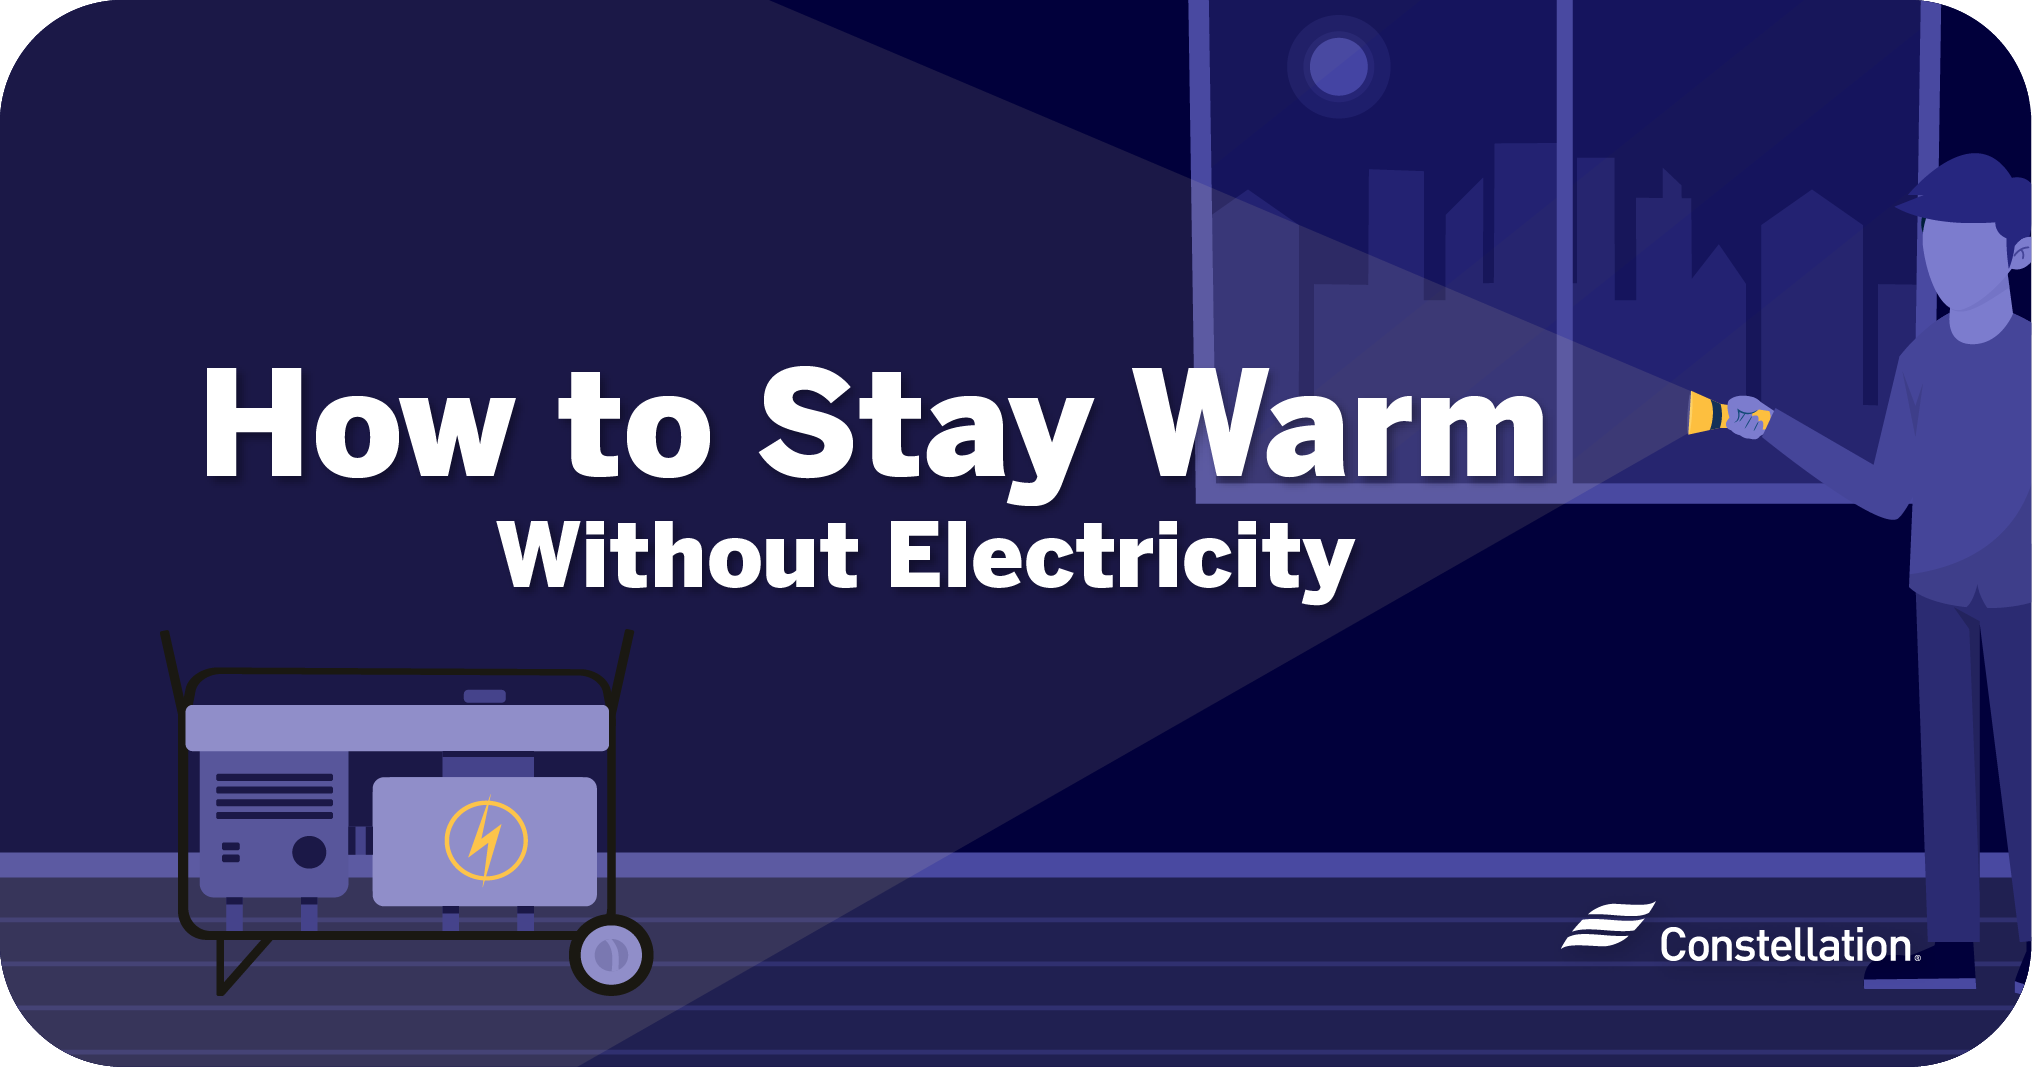 How to stay warm without electricity.